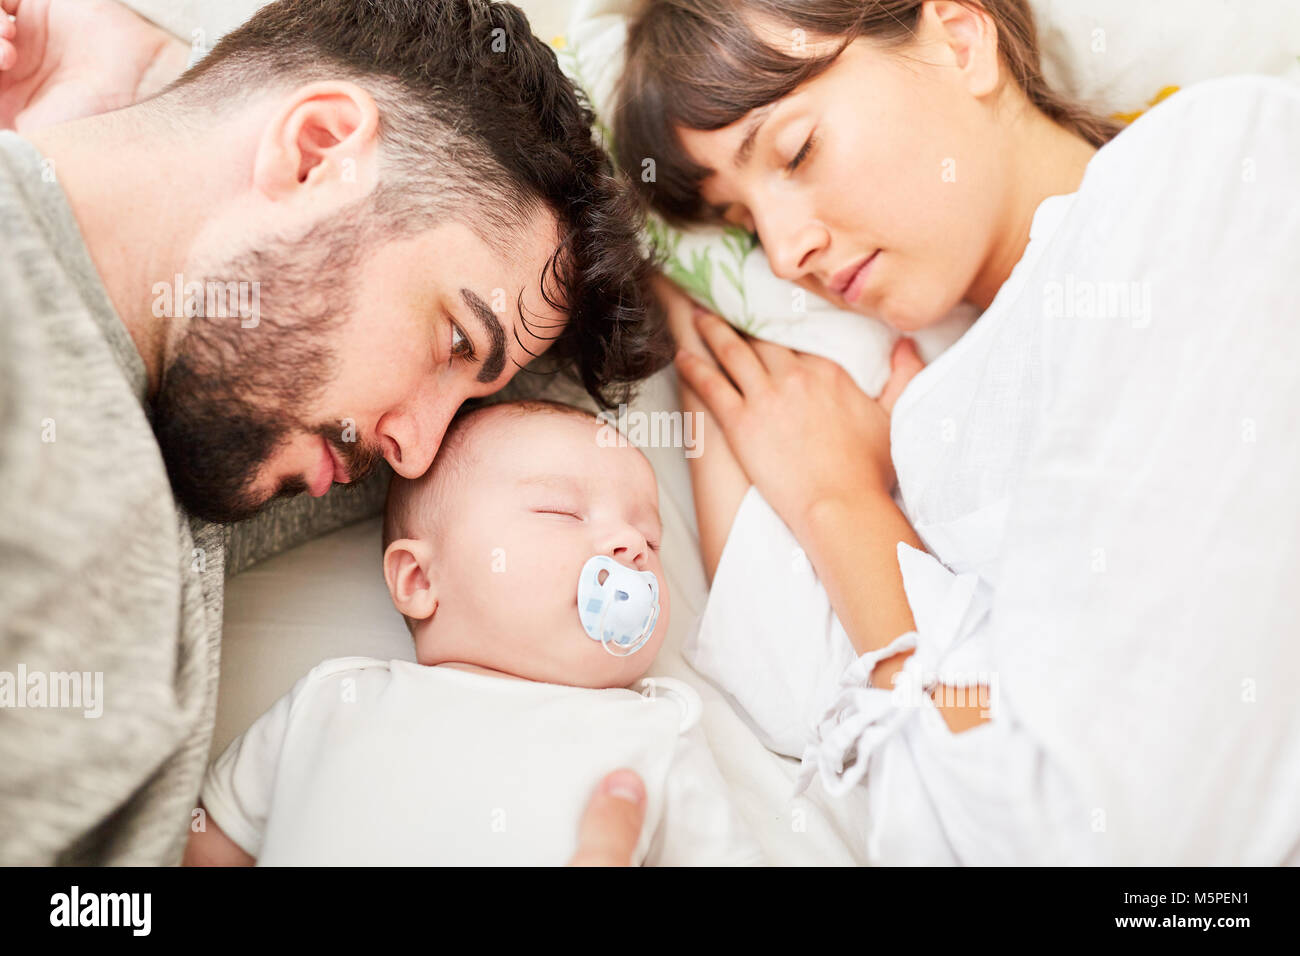 Father and mother as caring parents lie relaxed with baby on the bed Stock Photo